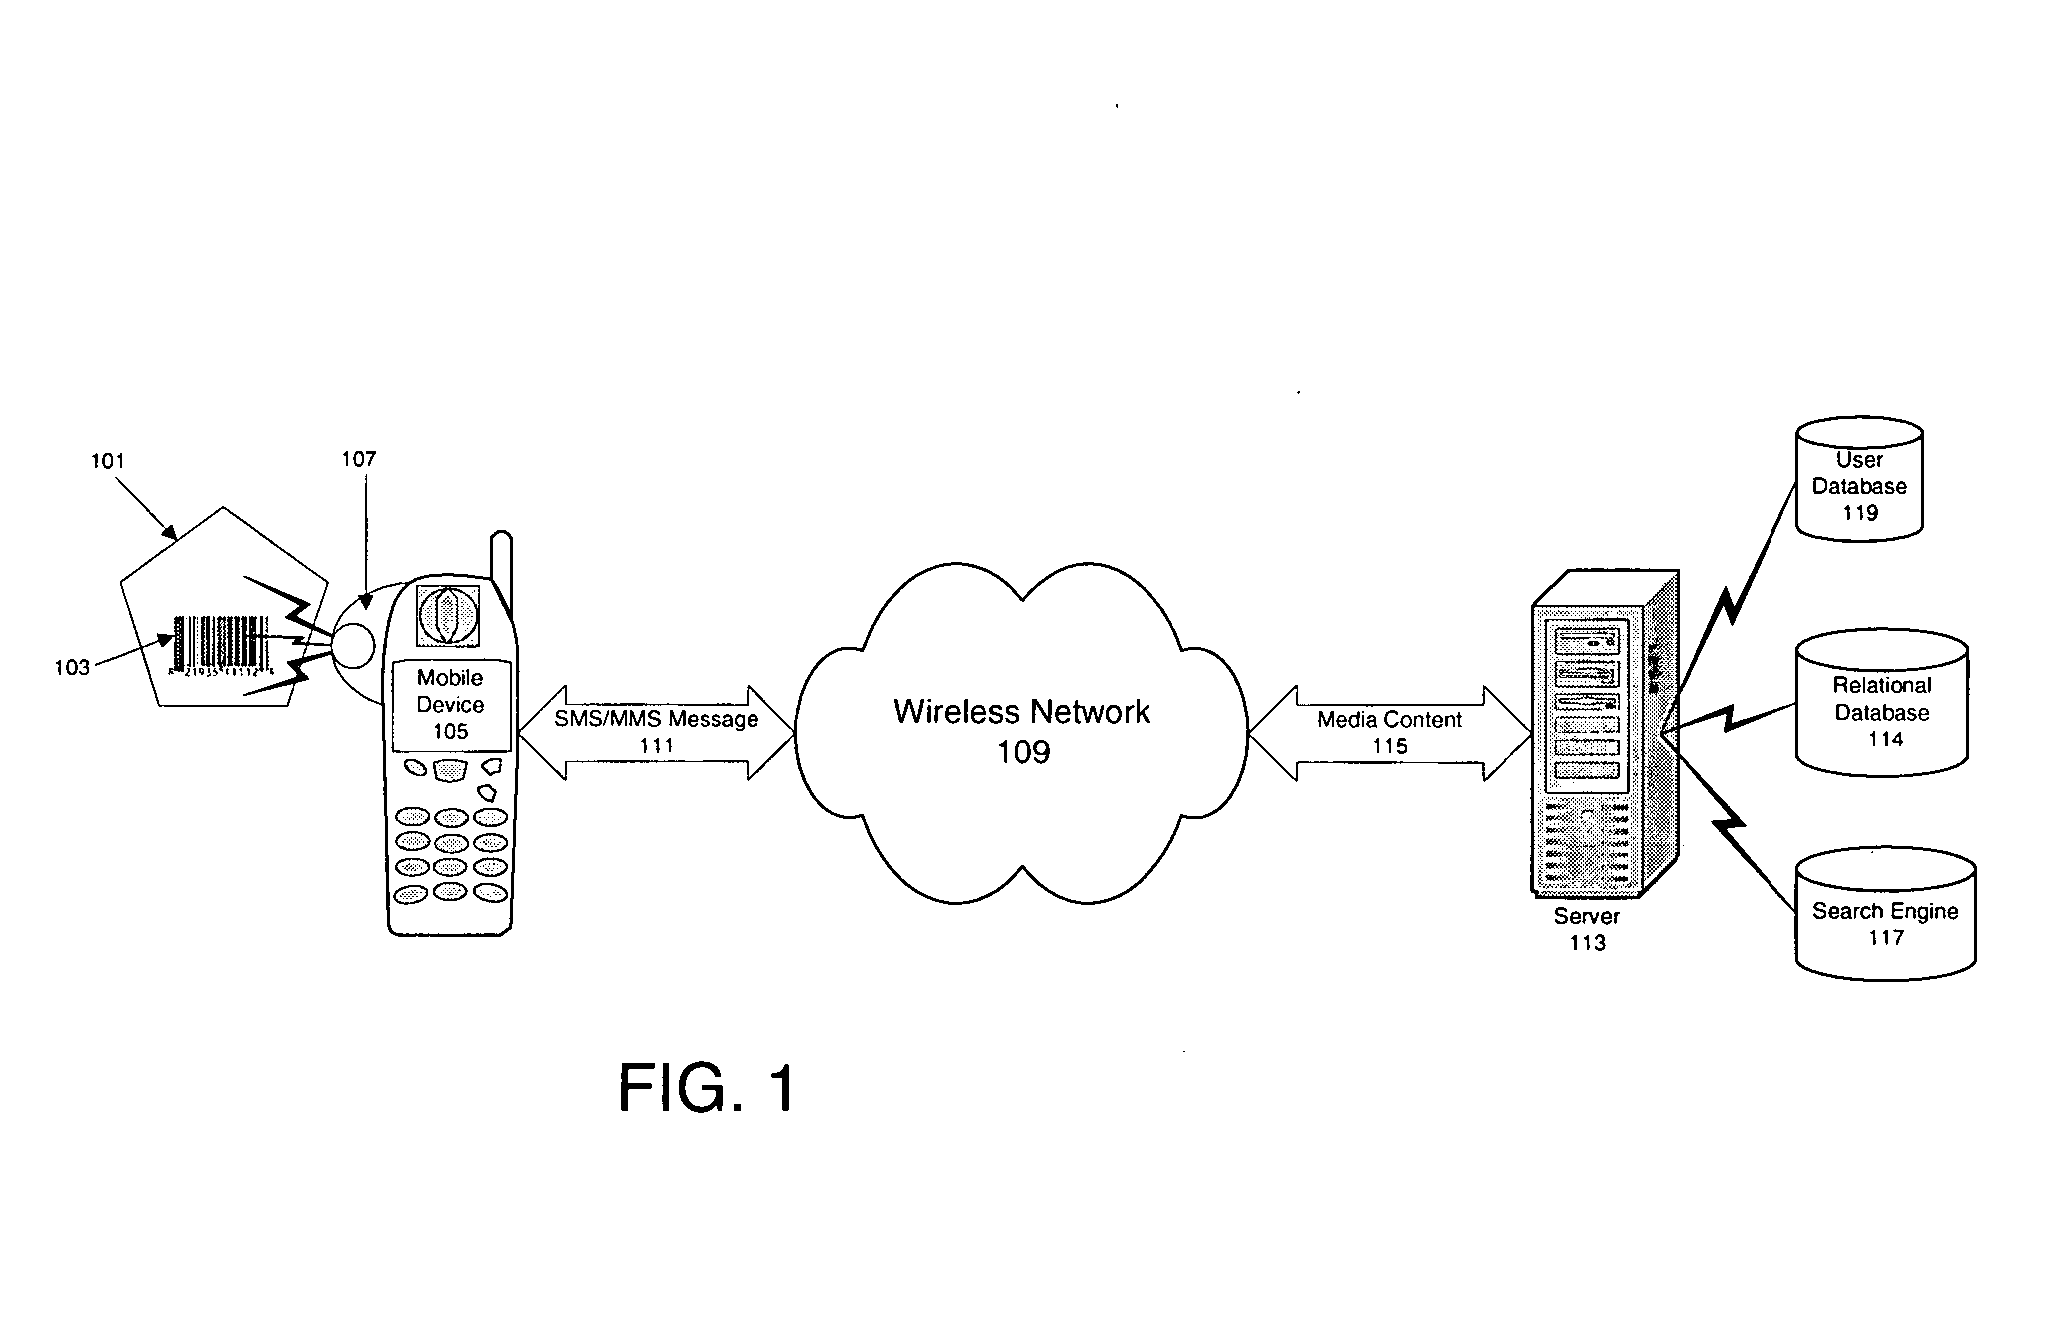 System and method for decoding and analyzing barcodes using a mobile device